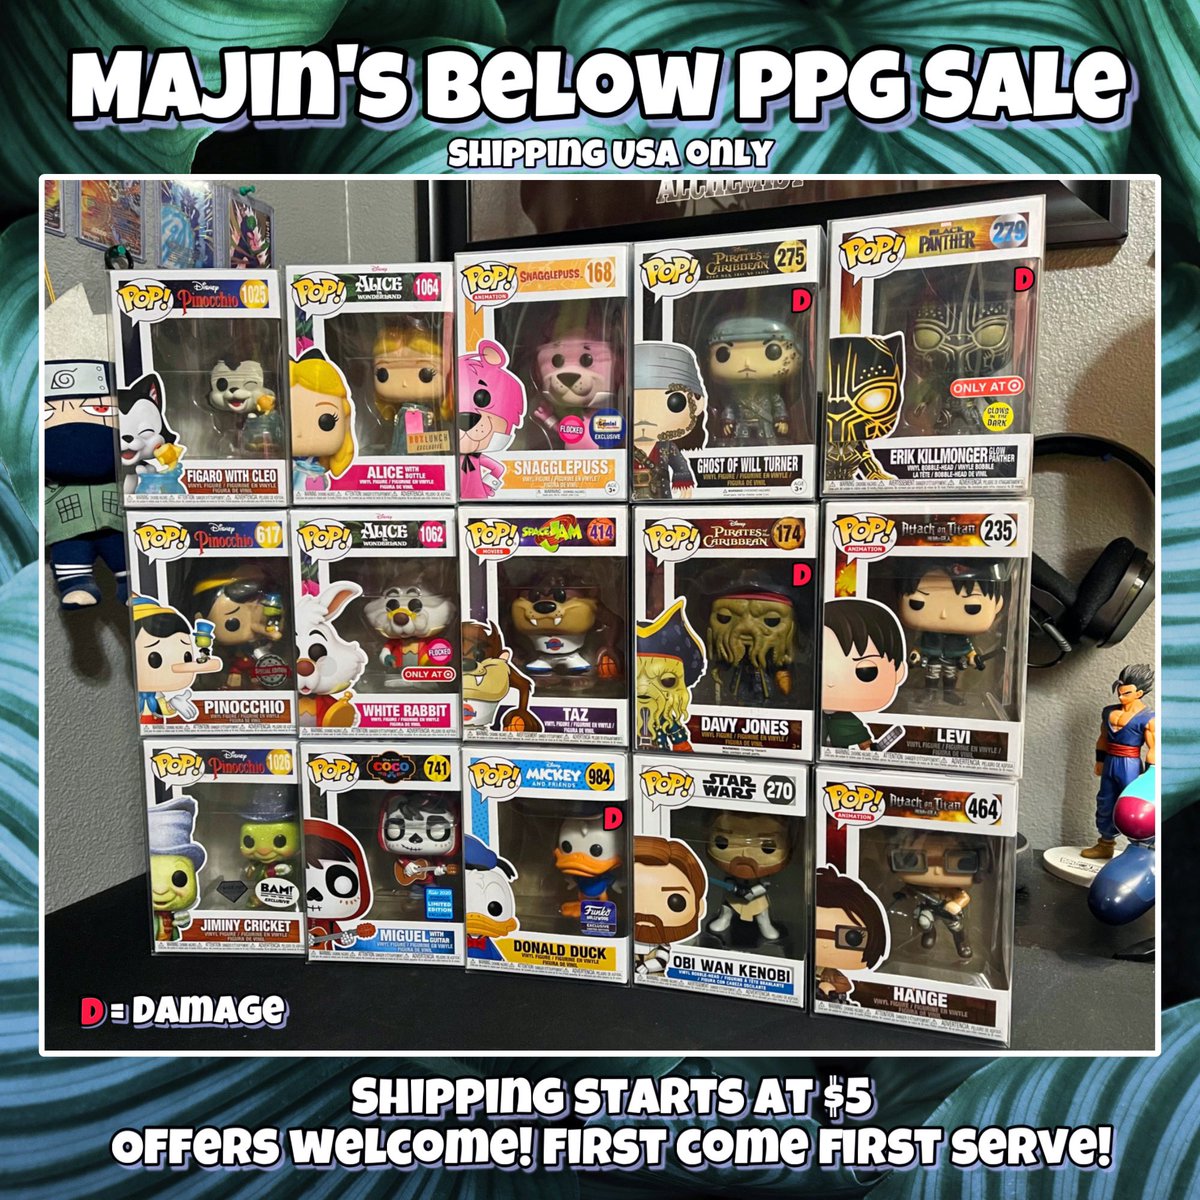 Evening Funko Family☕️🌞
We are letting go of some items
Shipping starts at $5 (USA Only🙏)
Please RT with the #FunkoFamily 
All come with soft protectors & shipped with bubble wrap!
#funkosale #funkocommunity